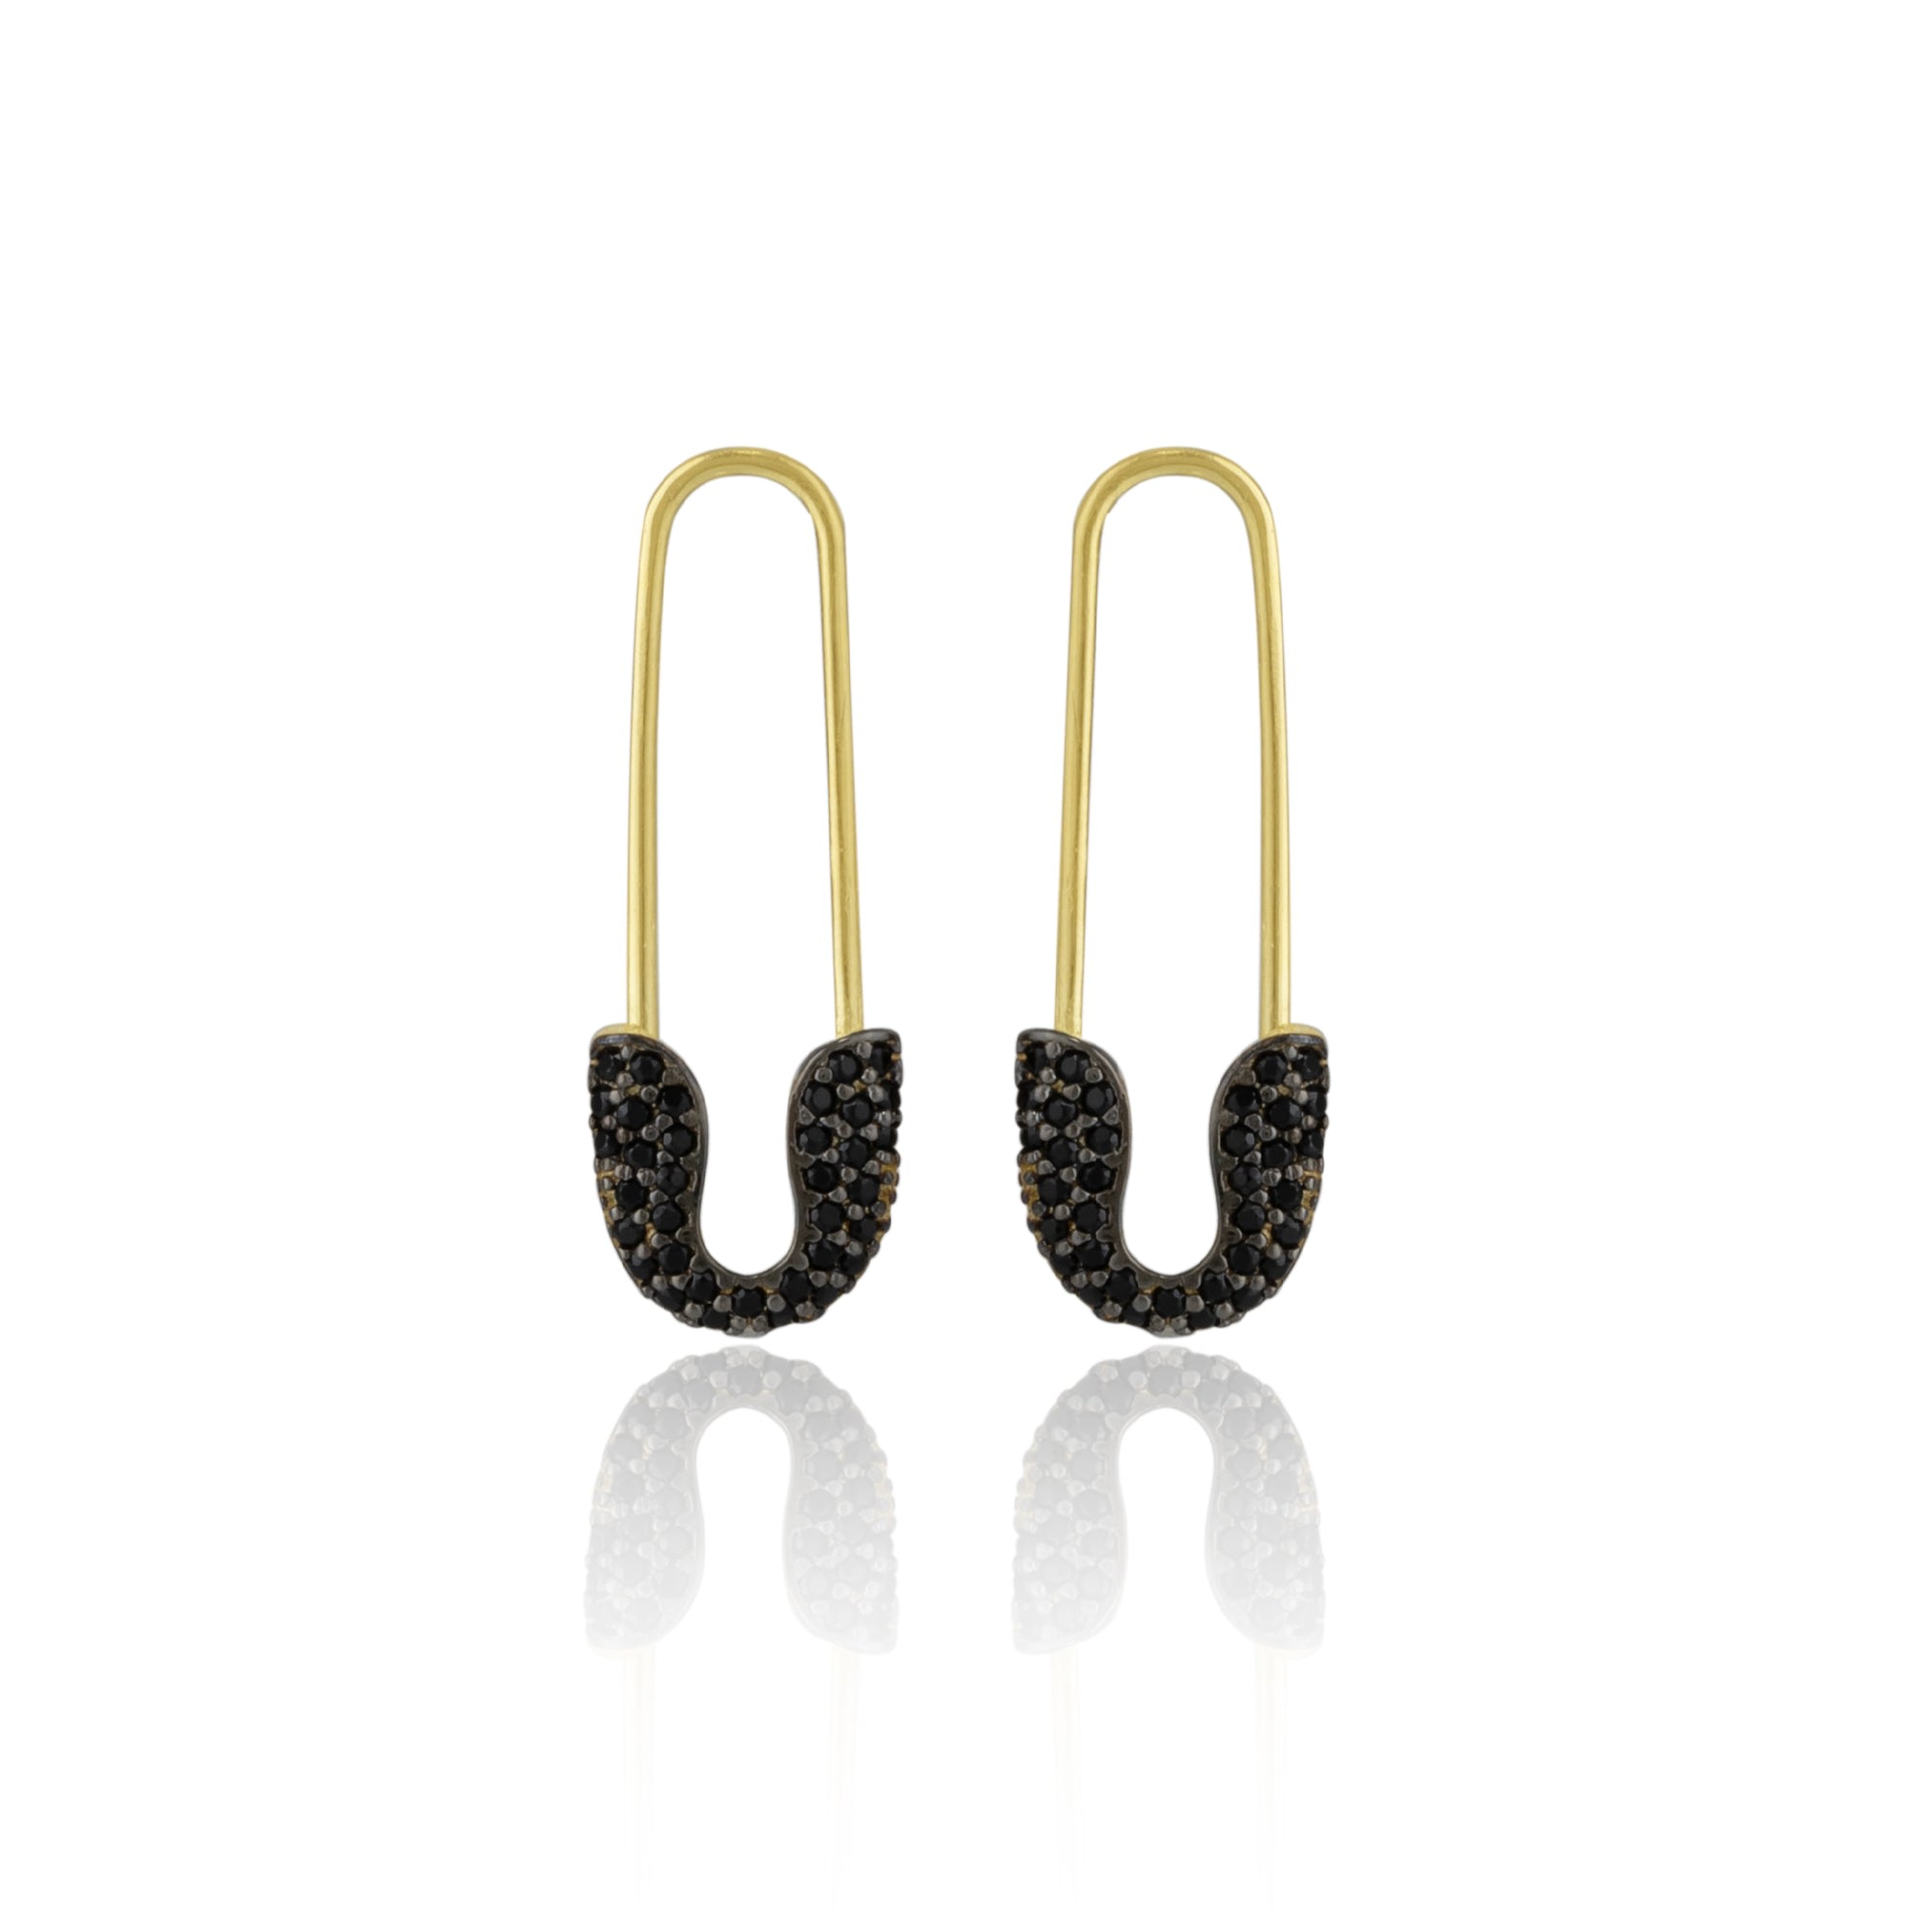 Spero London Women's Gold / Black Black Pave Safety Pin Earring Jewelled Sterling Silver - Gold